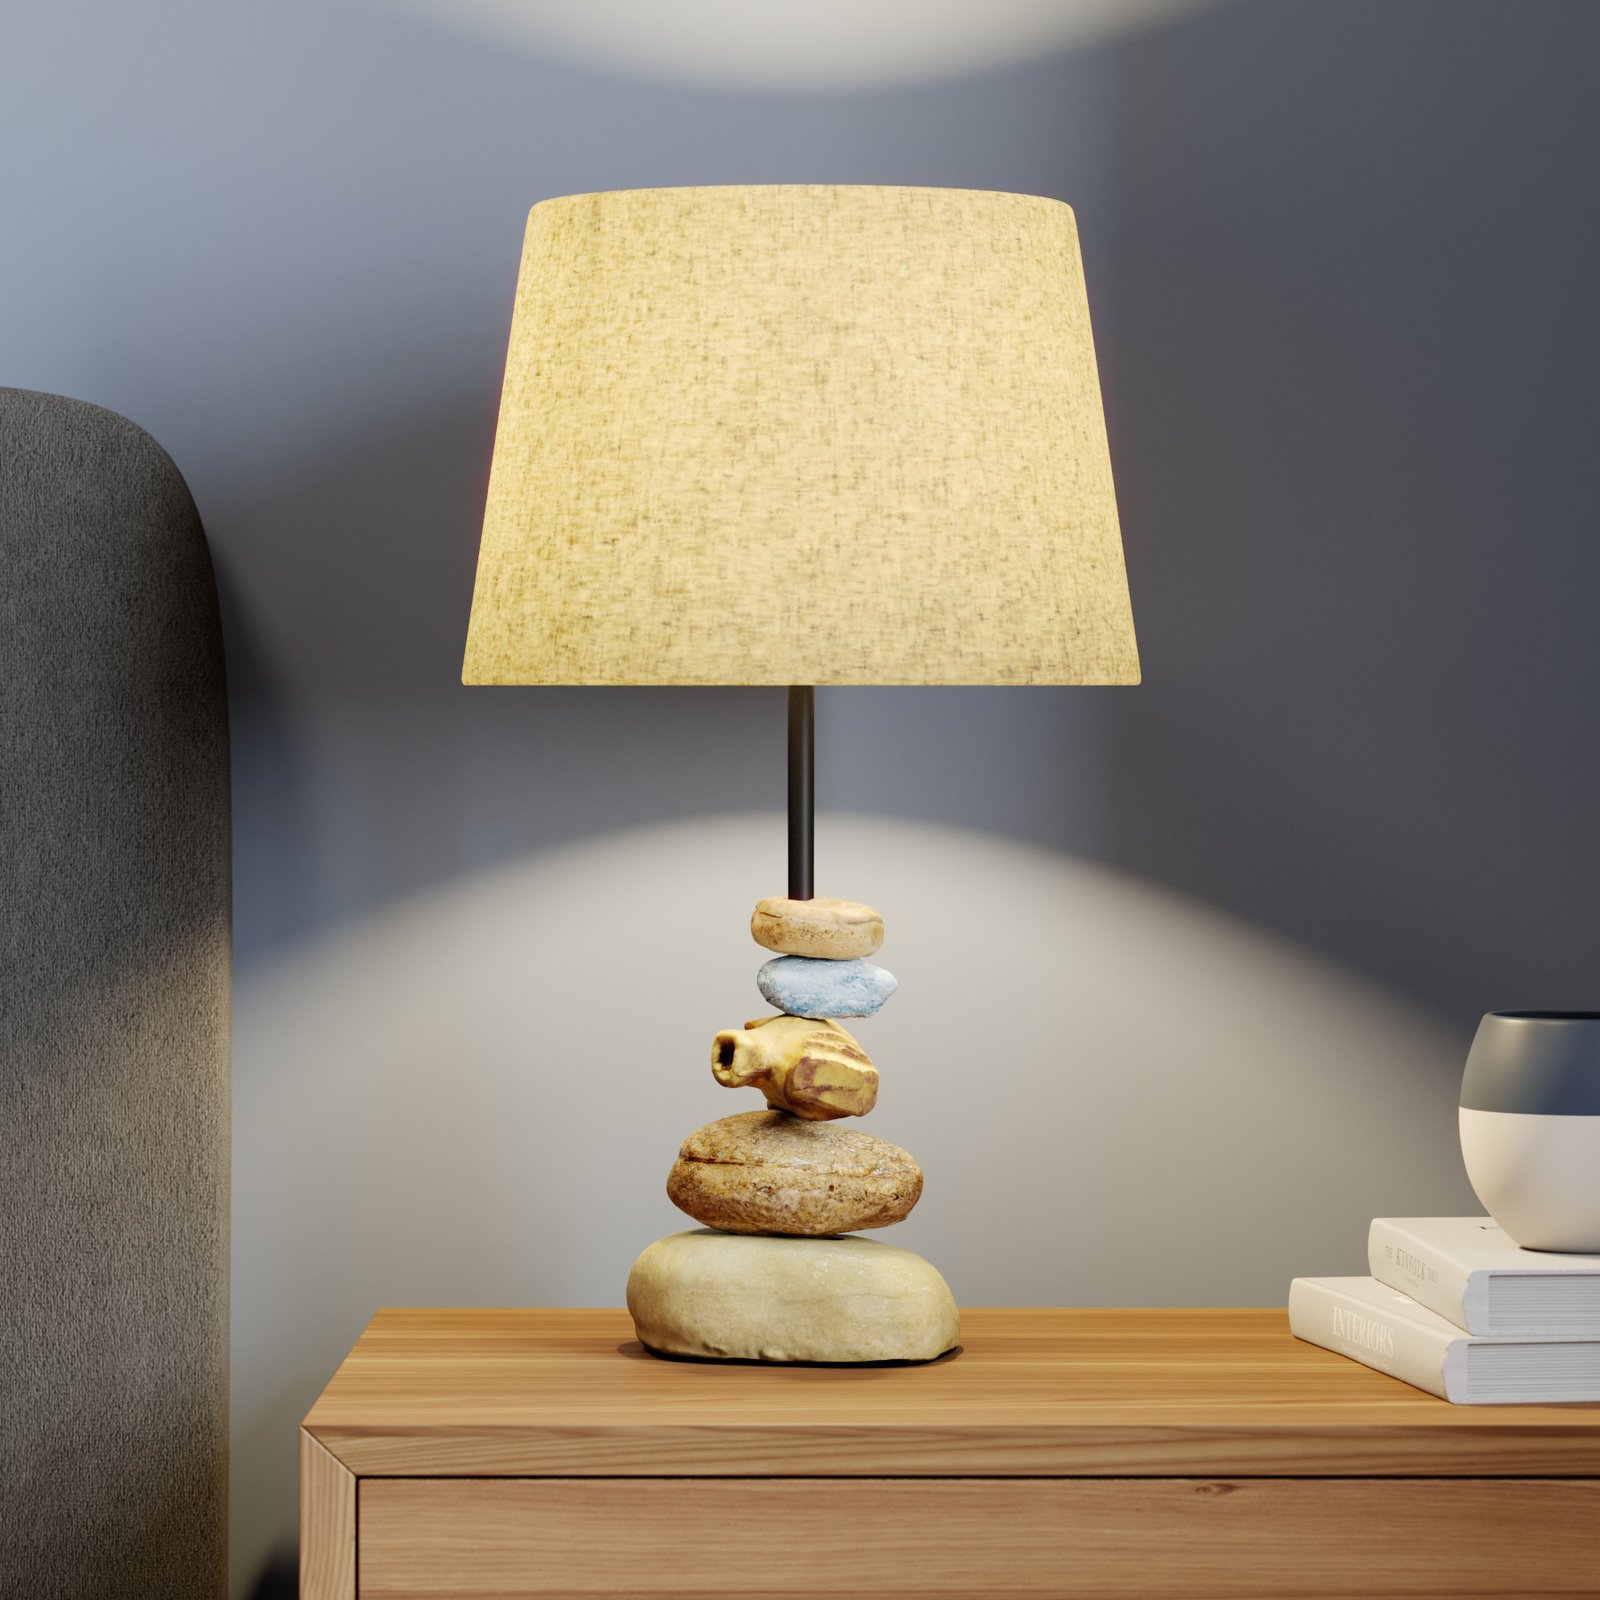 Vera table lamp, fabric lampshade and stones 38 cm